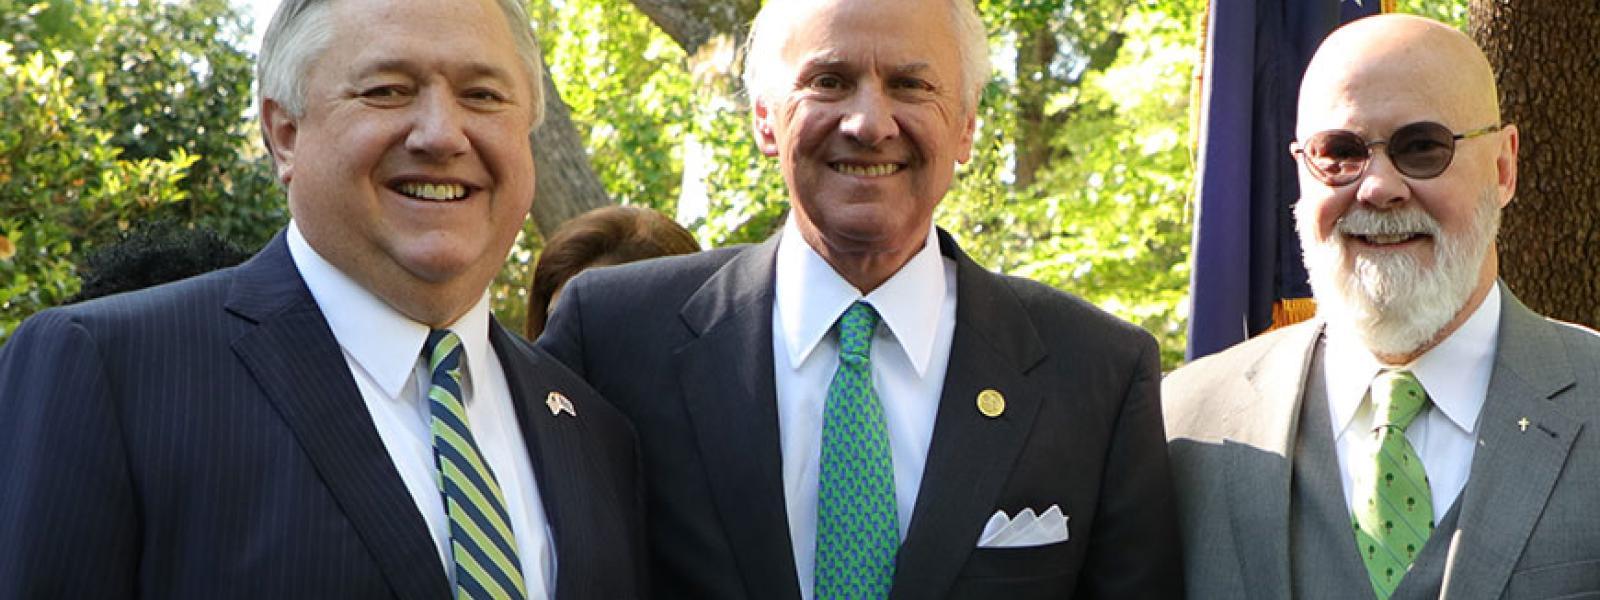 President Dr. Mark Smith (left) with SC Gov. Henry McMaster (center) and Tom Mullikin at the 2021 Earth Day commemoration in the garden of The Governor's Mansion. (Photo by Kierston Smith)